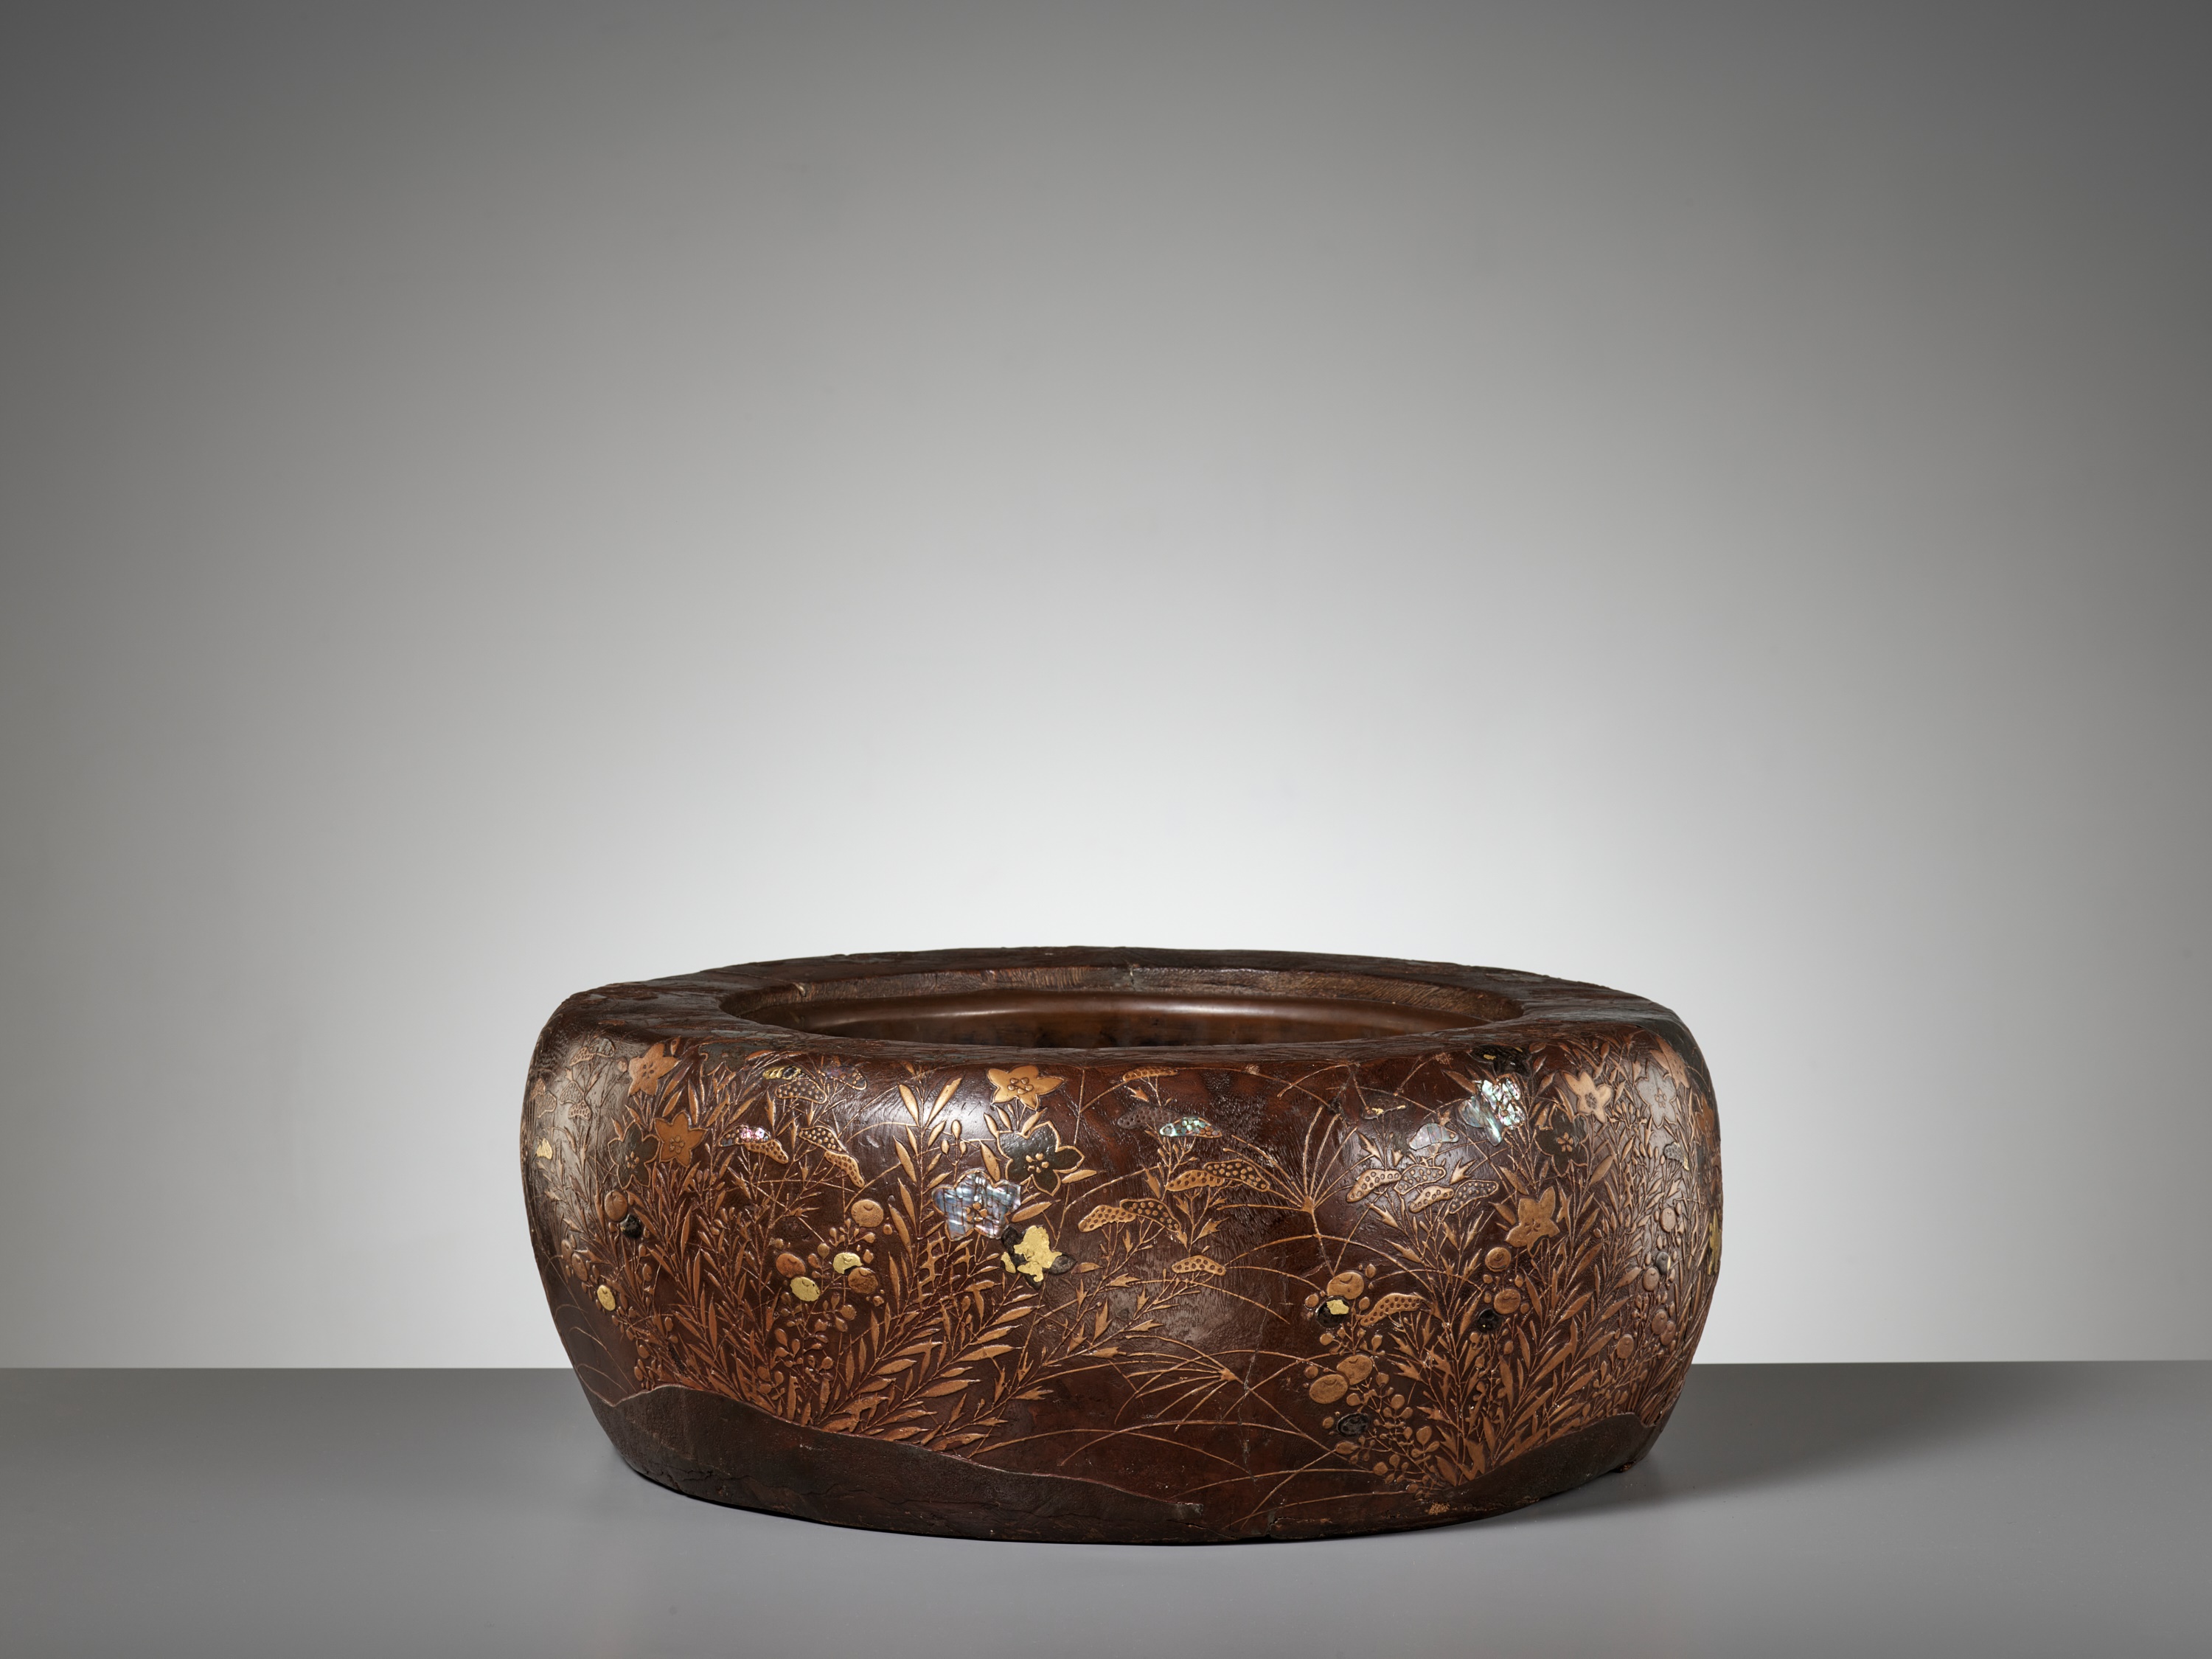 A LARGE RIMPA STYLE LACQUERED AND INLAID PAULOWNIA WOOD HIBACHI (BRAZIER) WITH LUNAR HARES - Image 8 of 14